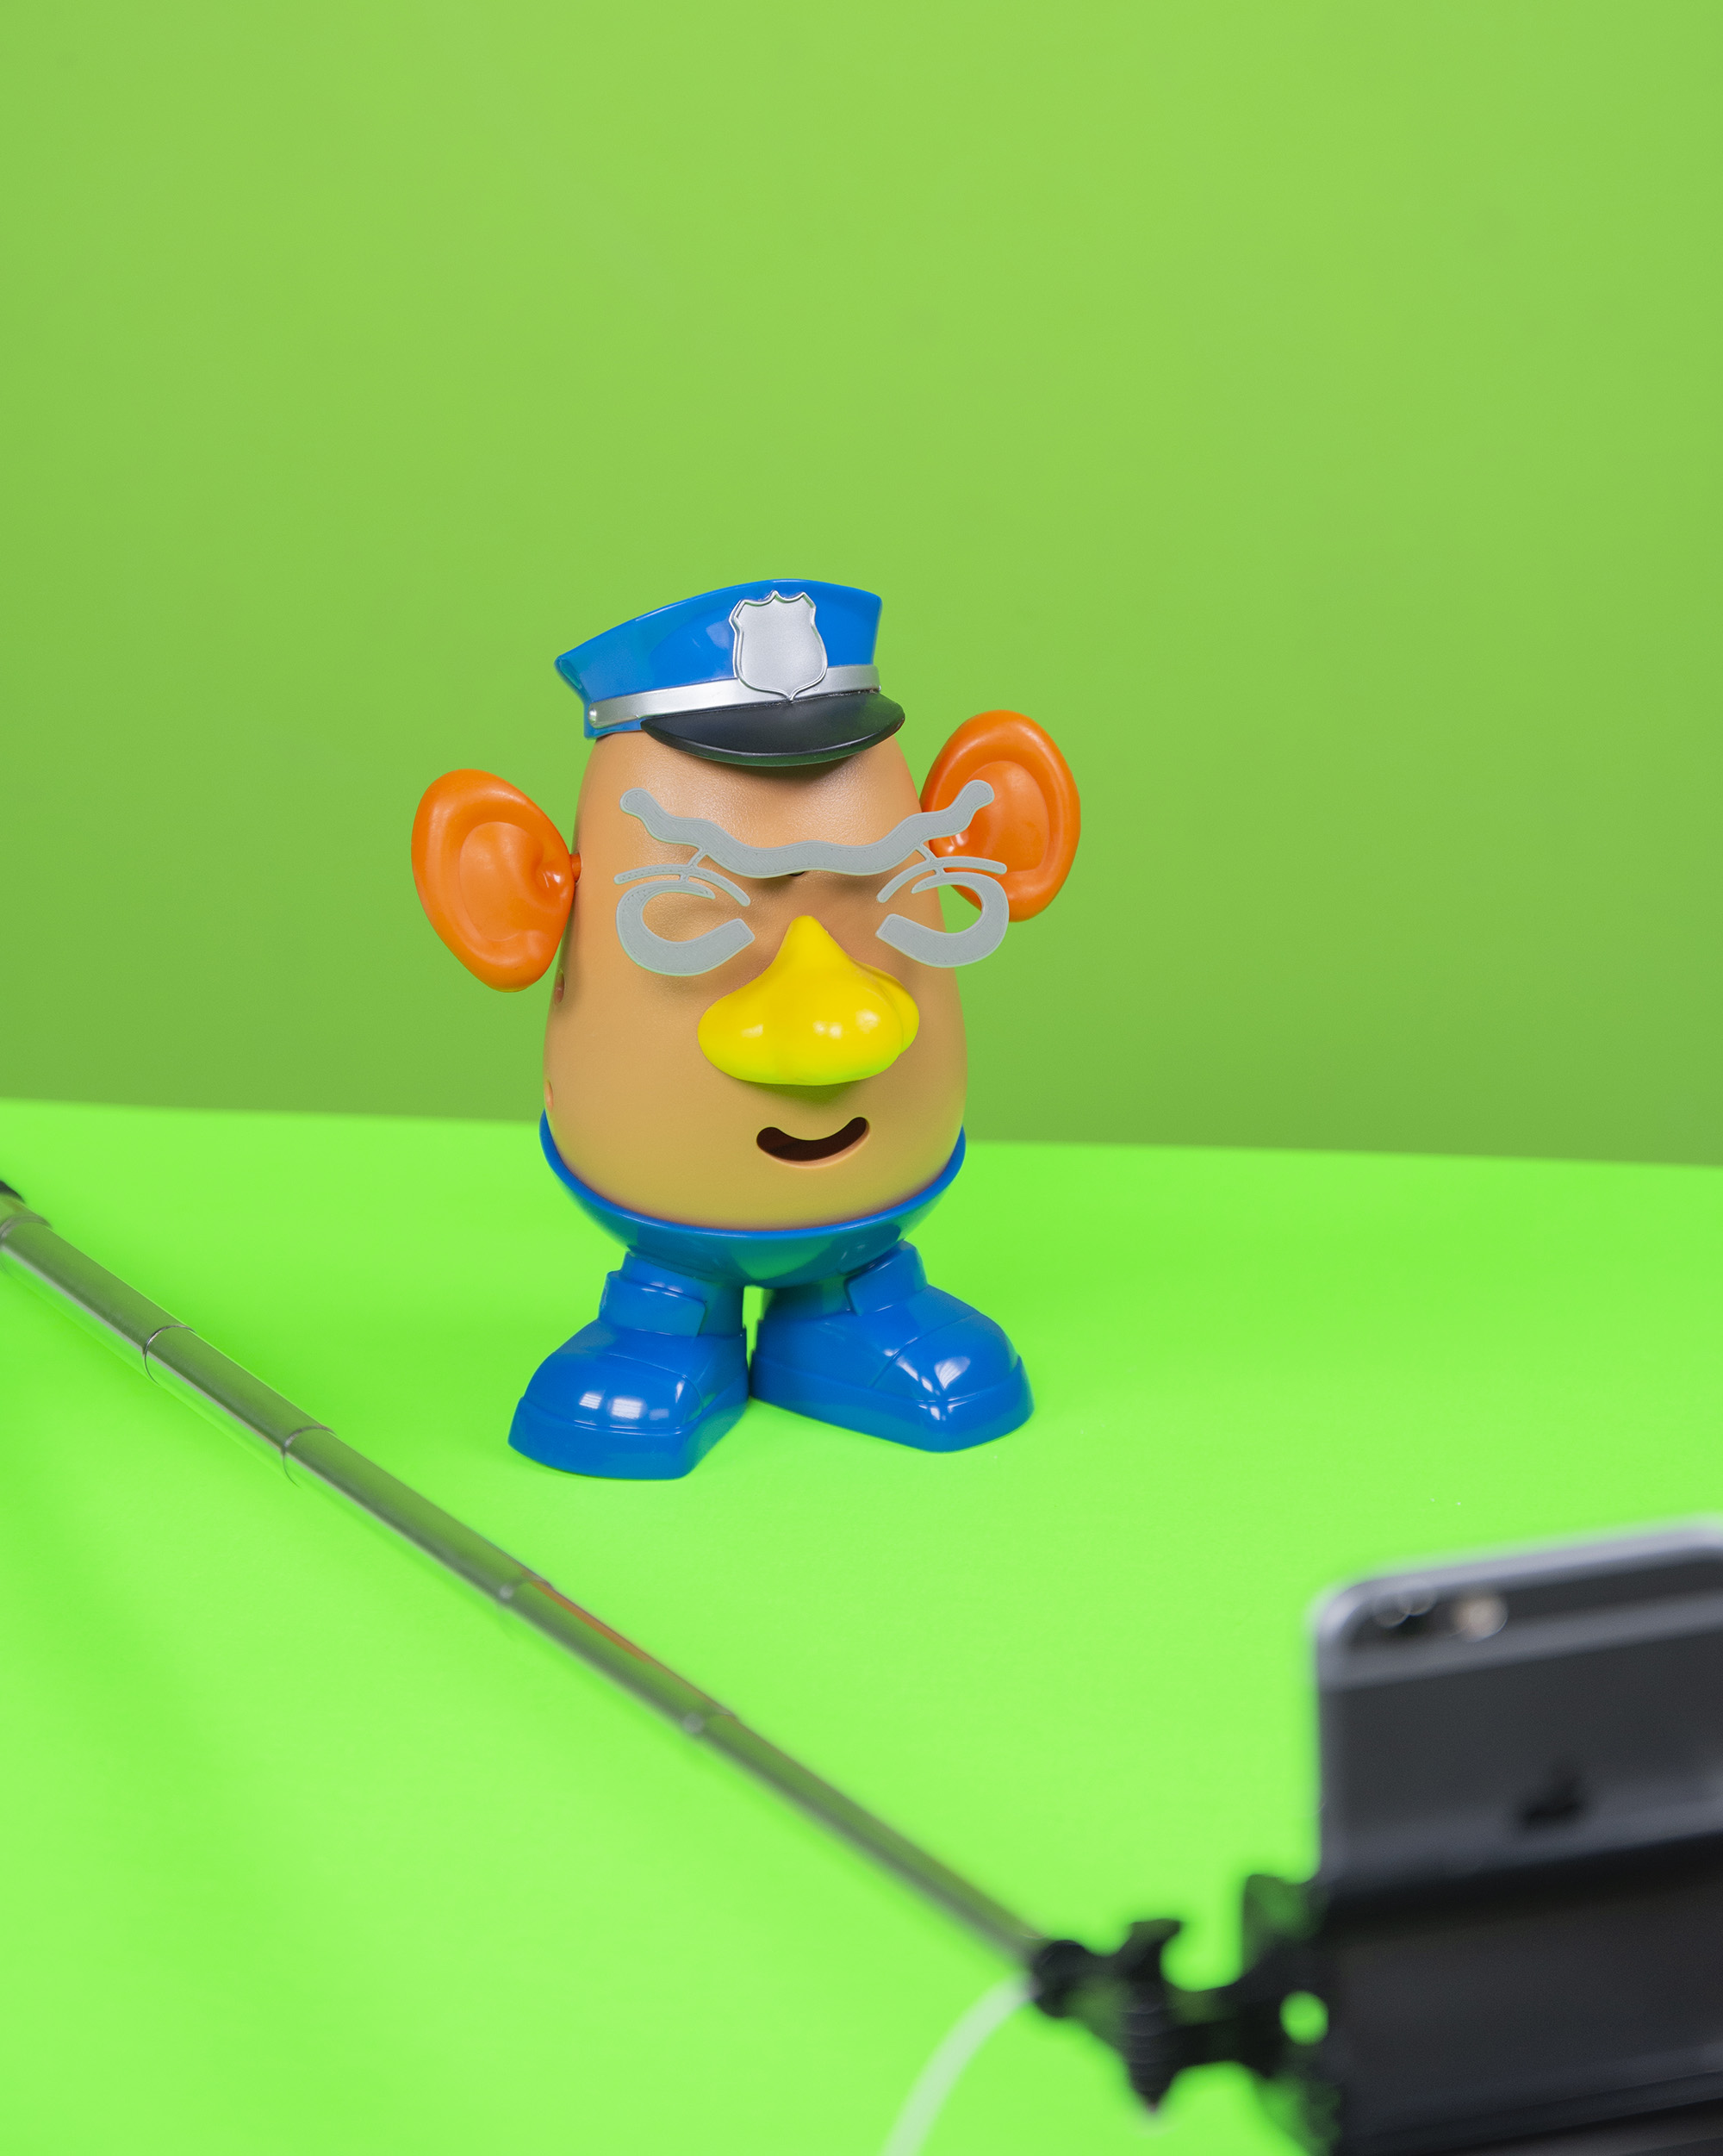 Does DOES Mr/Ms/Other Potato Head